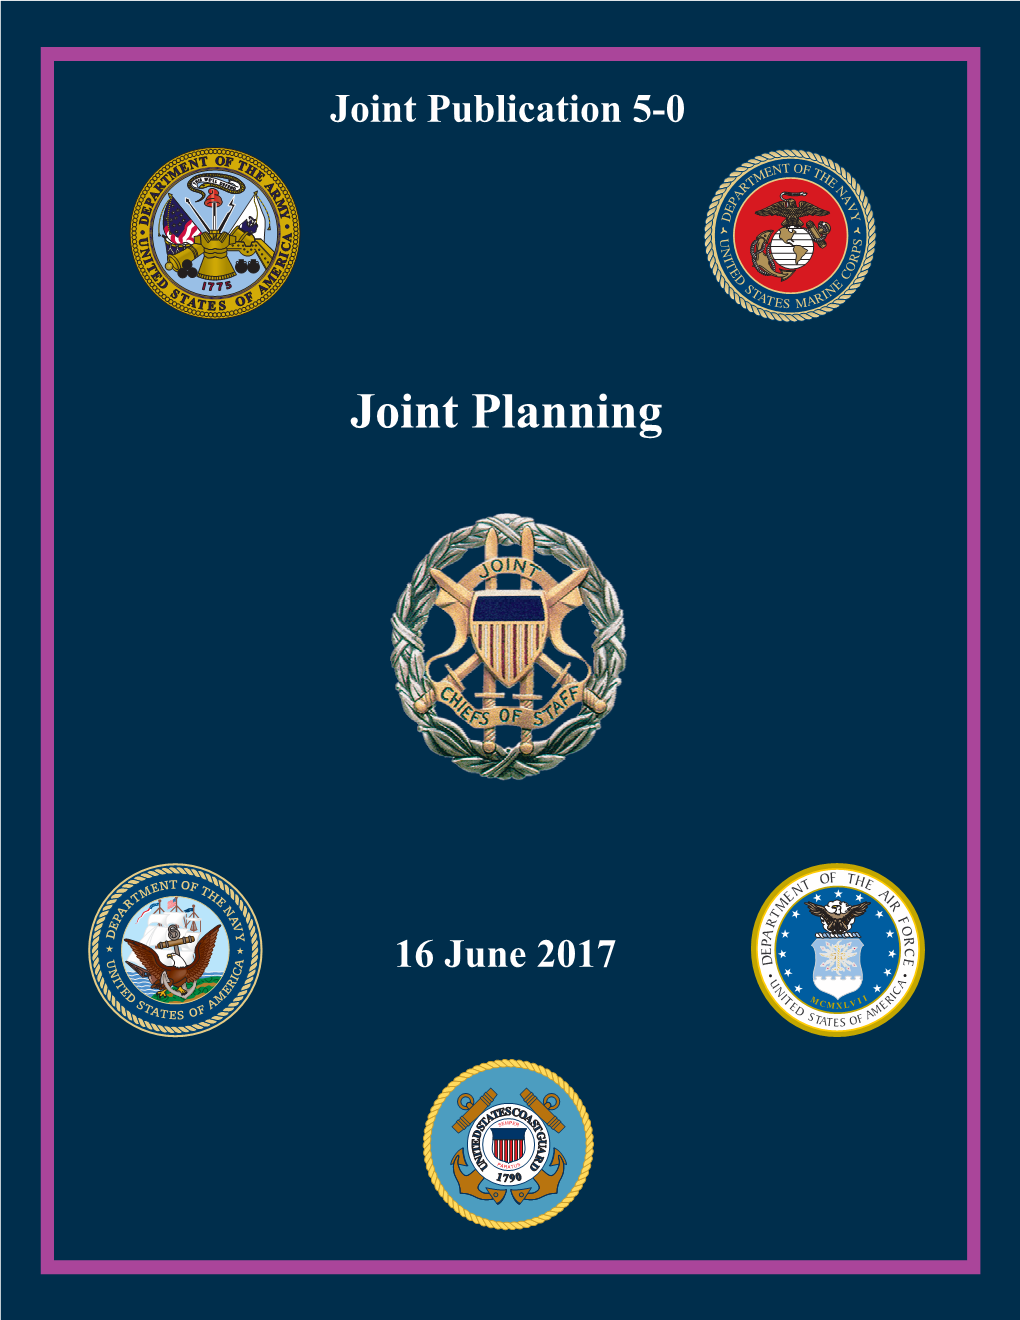 JP 5-0, Joint Planning